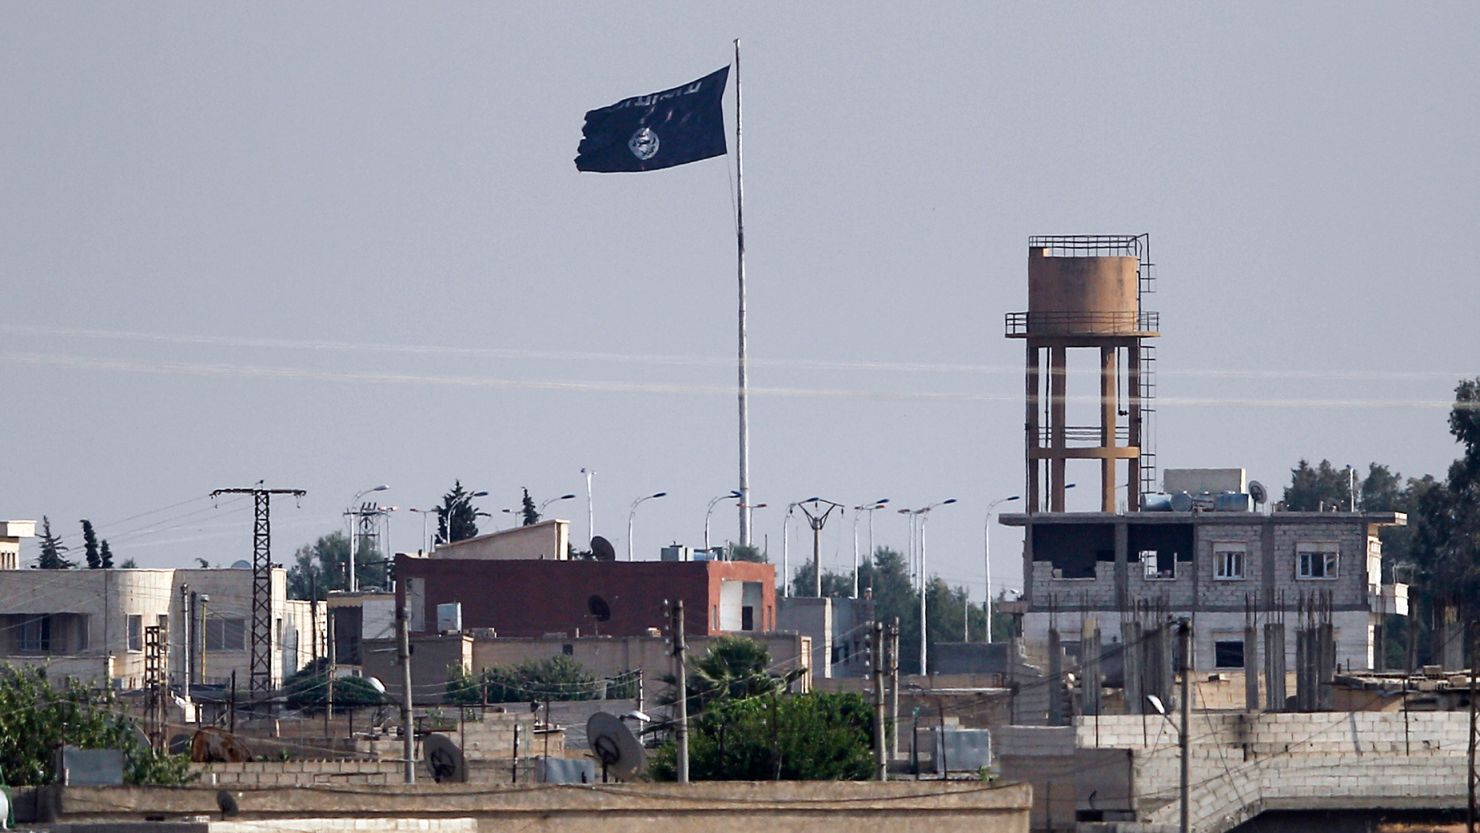 An ISIS flag flies in the northern Syrian town of Tel Abyad as seen from the Turkish border town of Akcakale on June 15, 2015.